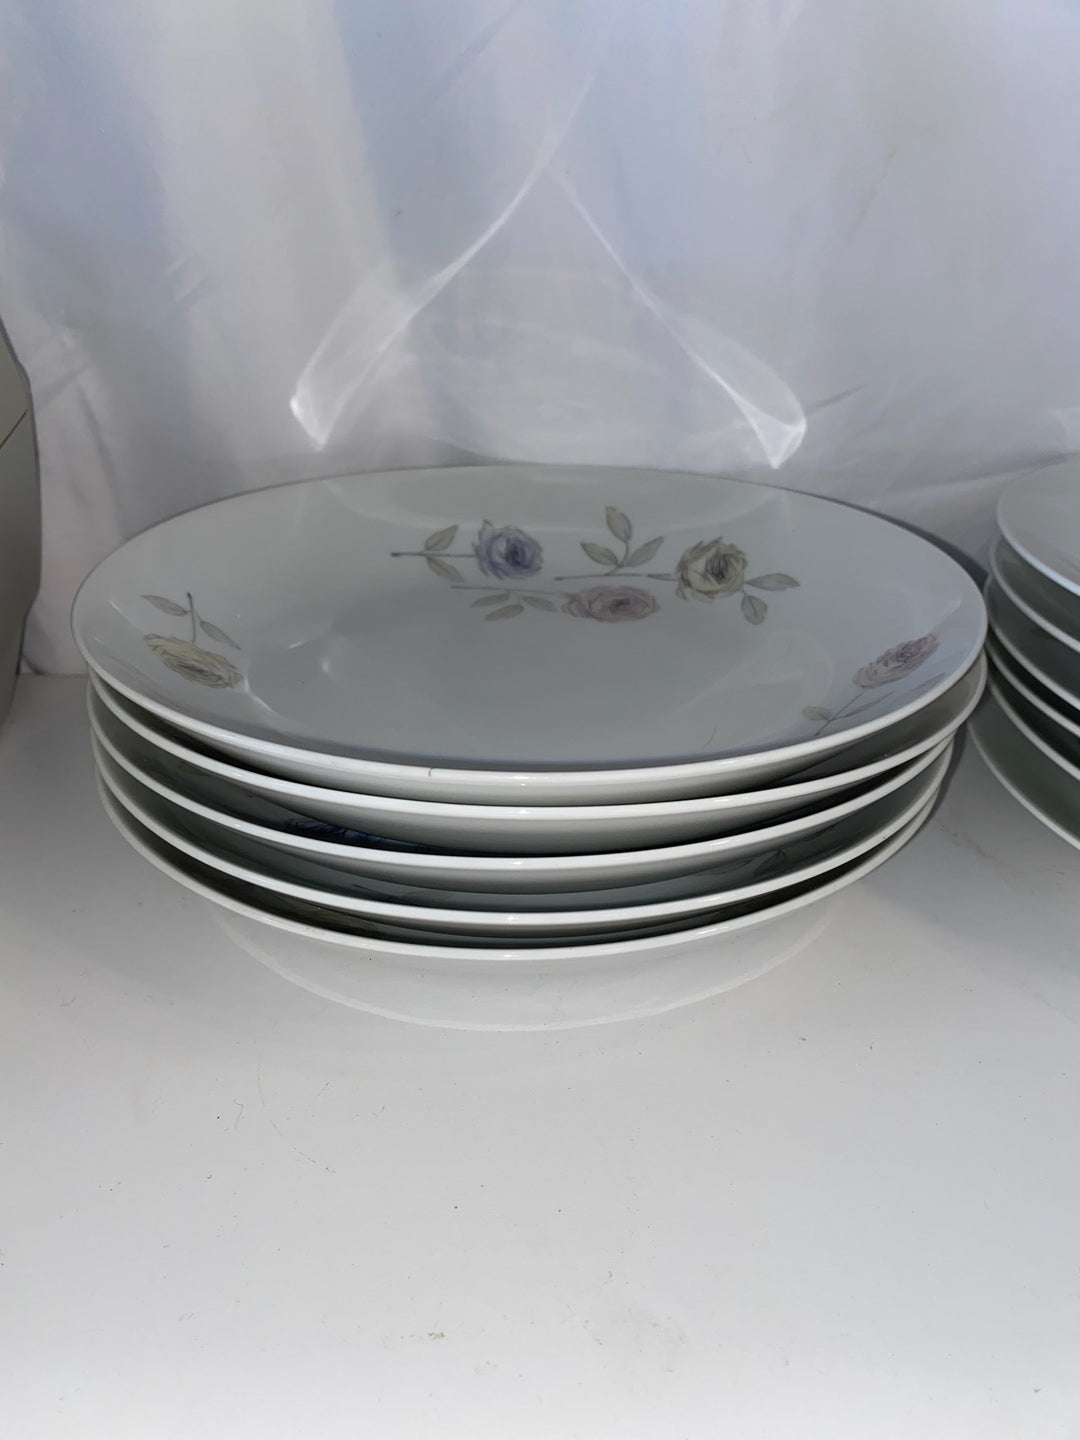 Chinaware soup bowls (each)